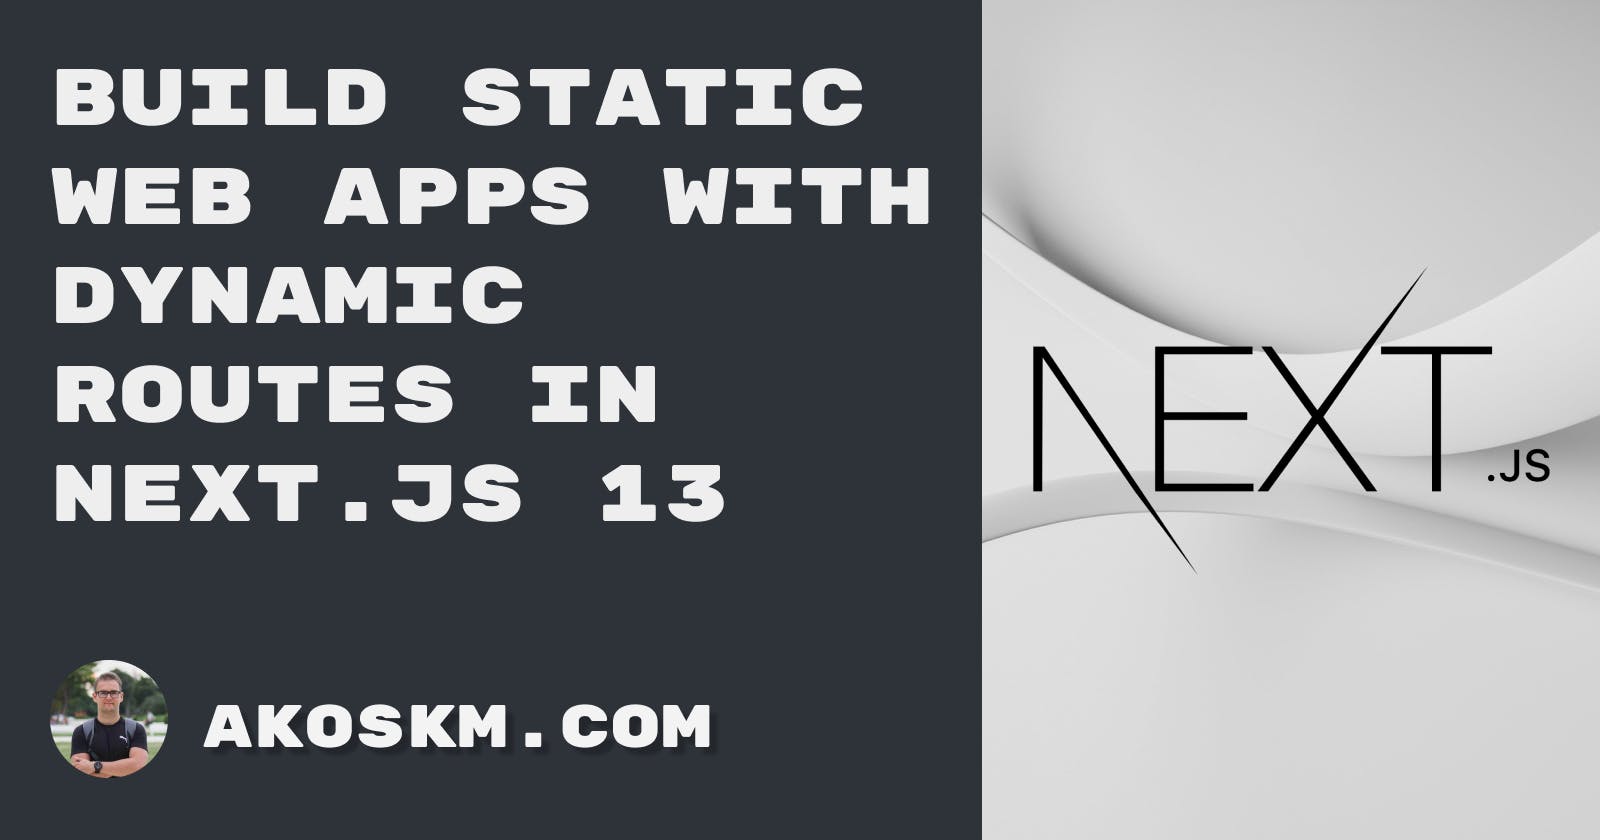 How to build static web apps with dynamic routes in Next.js 13